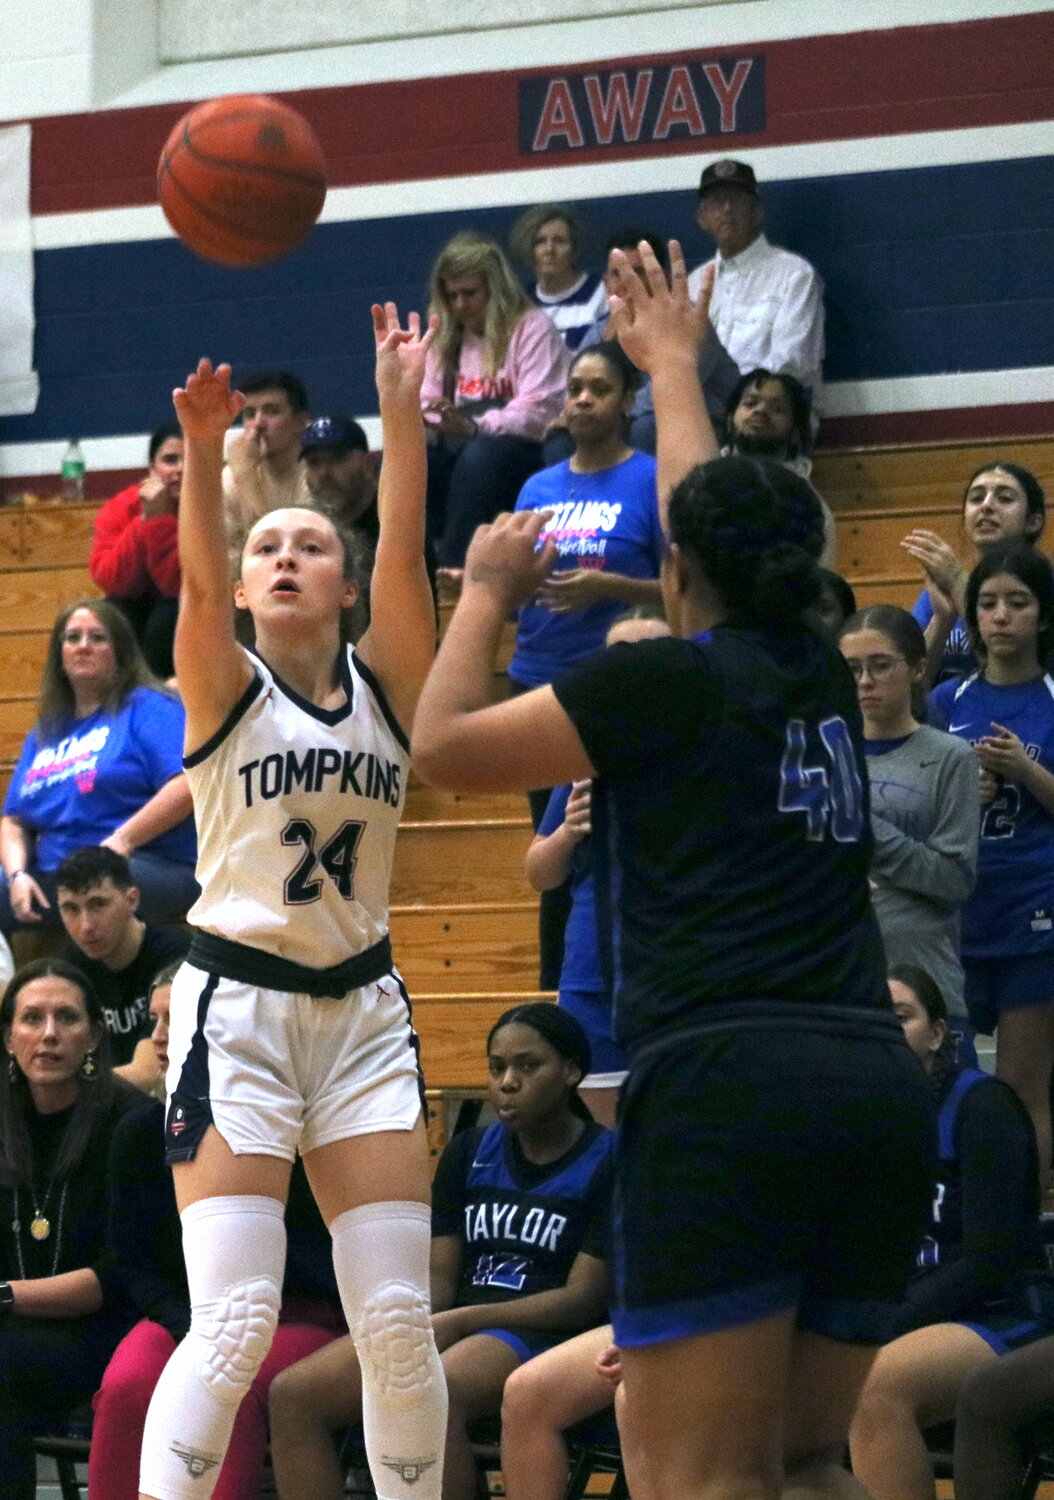 Gabby Panter shoots a 3-pointer during Friday's game between Taylor and Tompkins at the Tompkins gym.